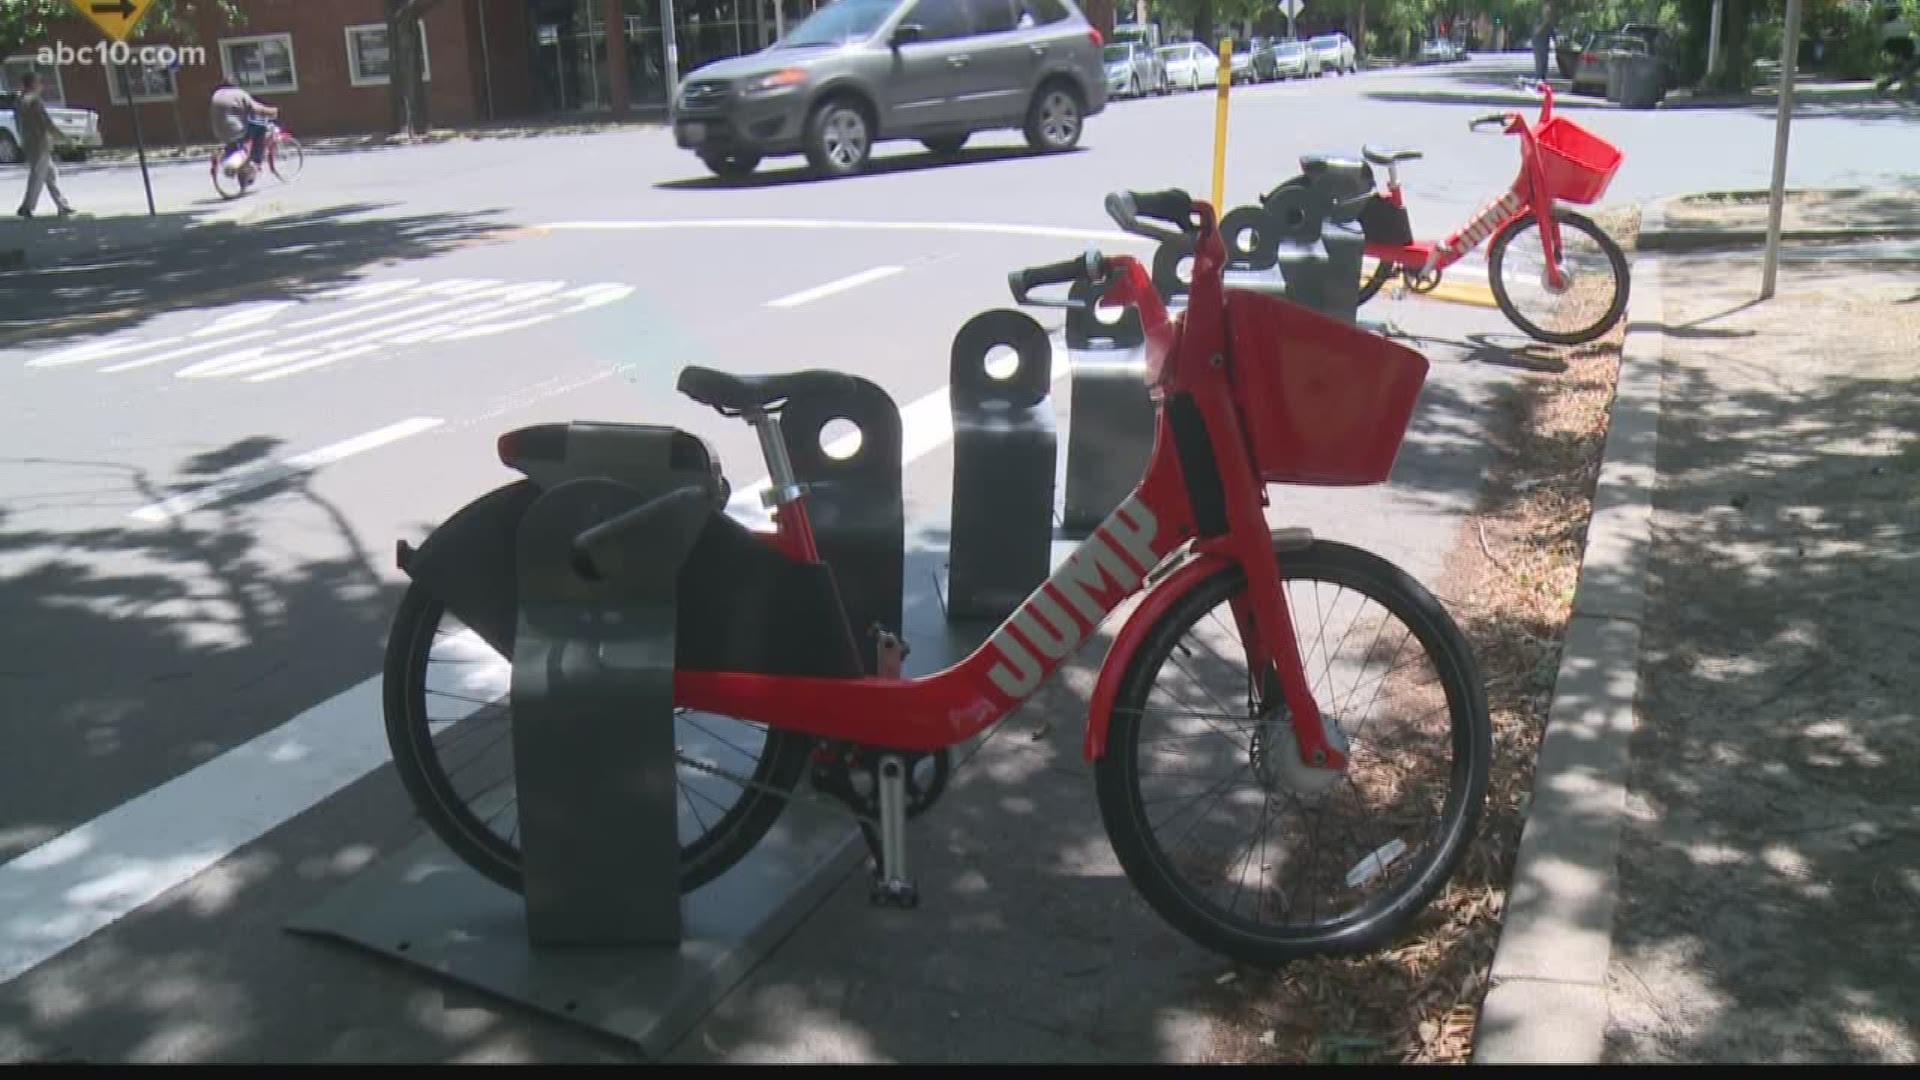 The newest bicycles are the red electrical bikes you may have seen scattered throughout the Sacramento, West Sacramento, and Davis areas in the last two weeks.